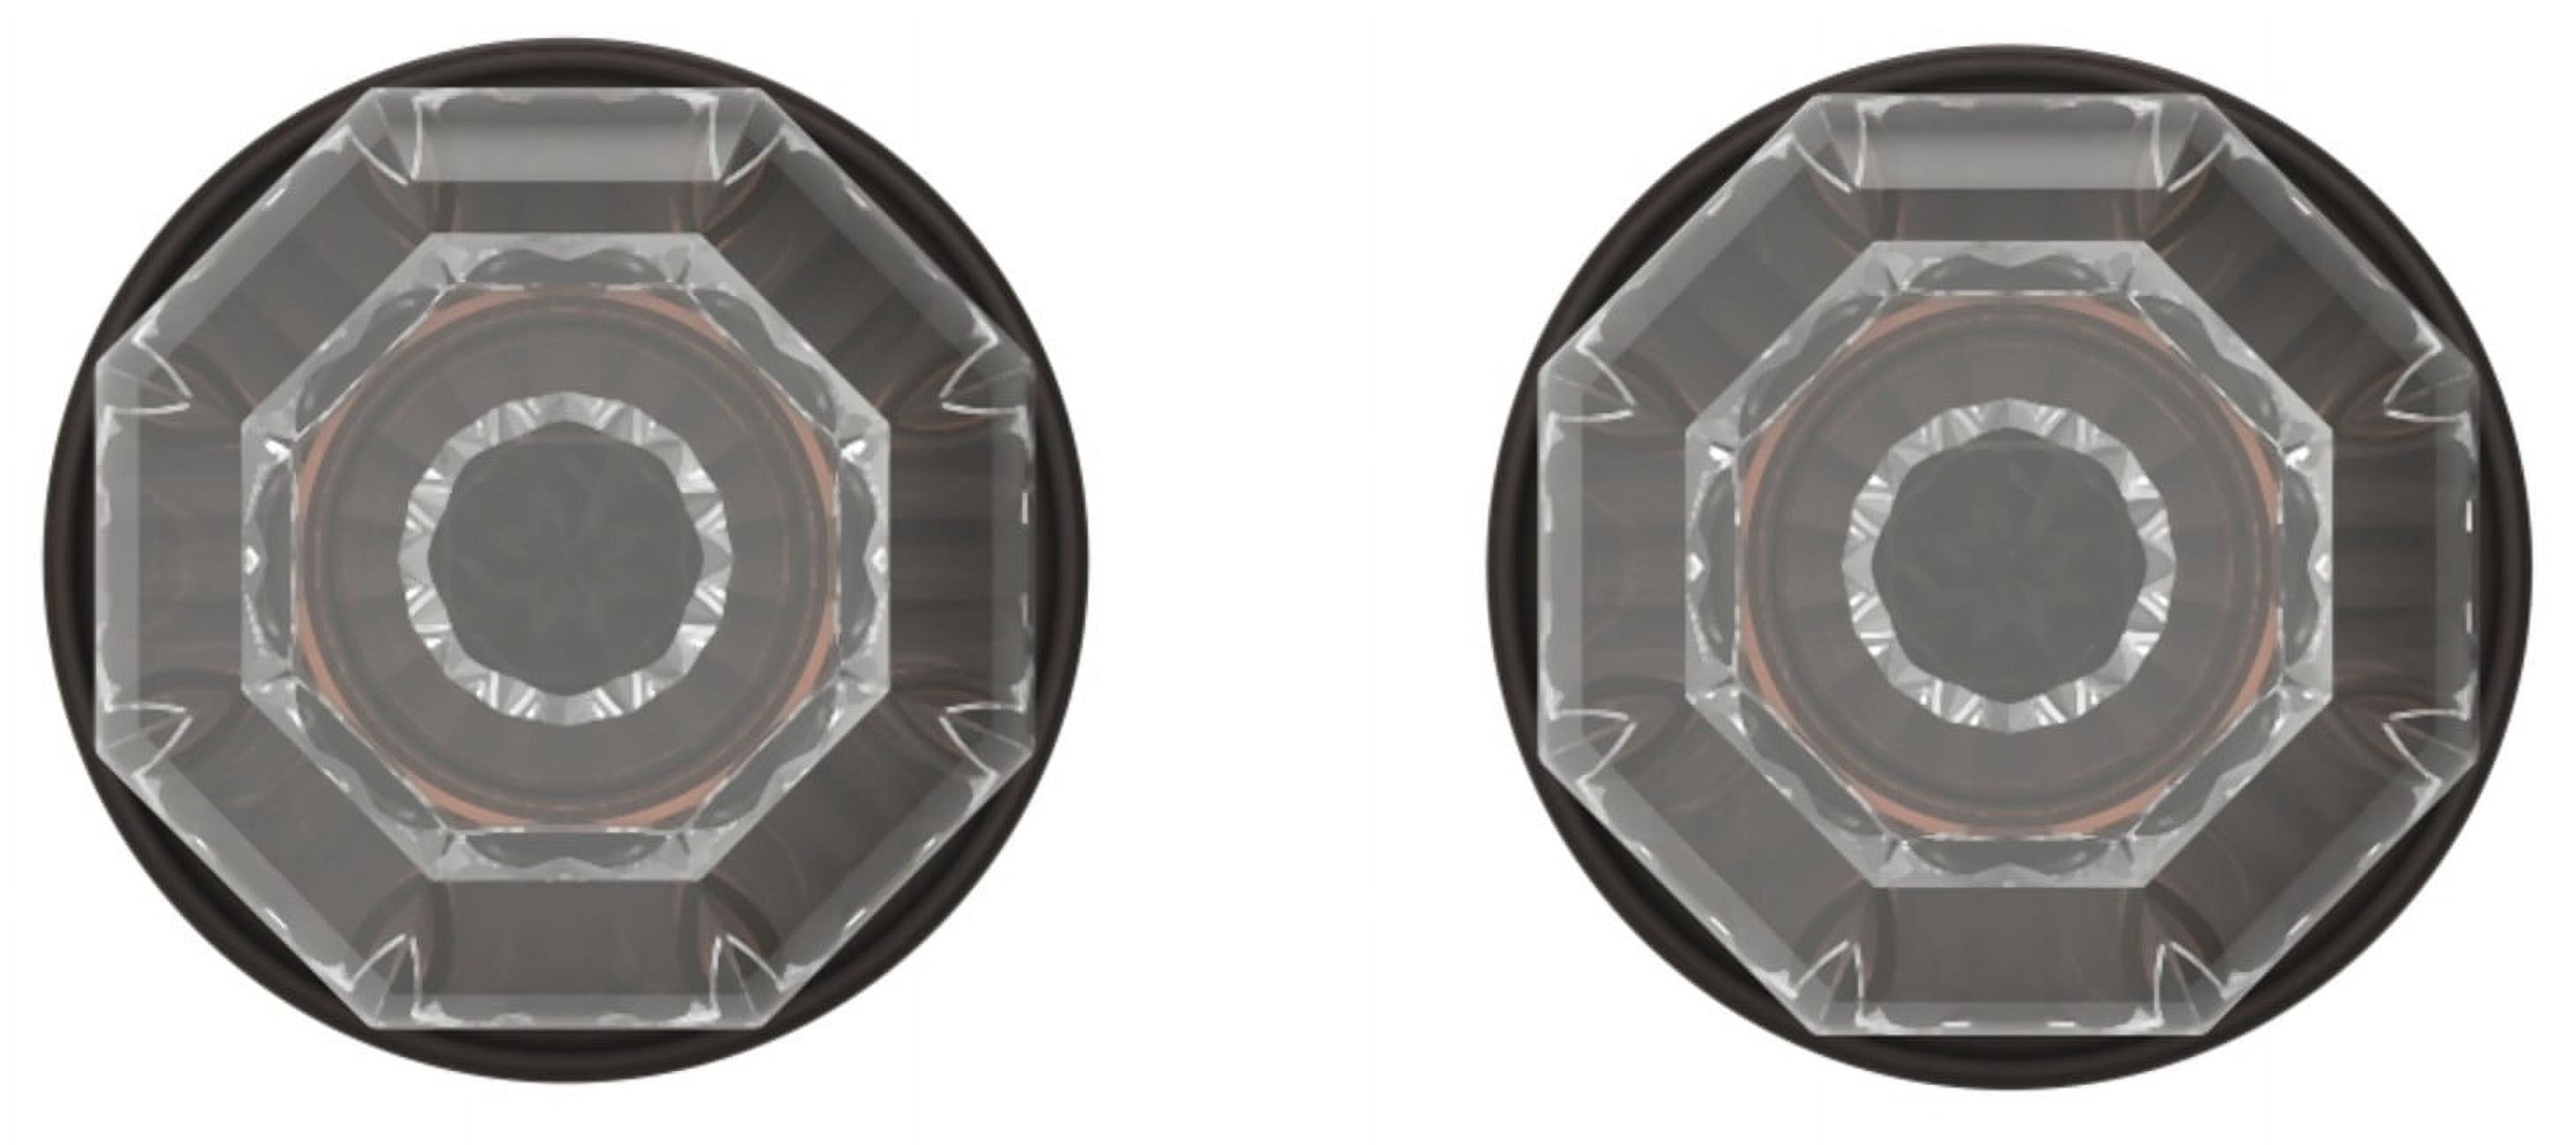 Filmore Oil-Rubbed Bronze Privacy Crystal Knob - image 4 of 7